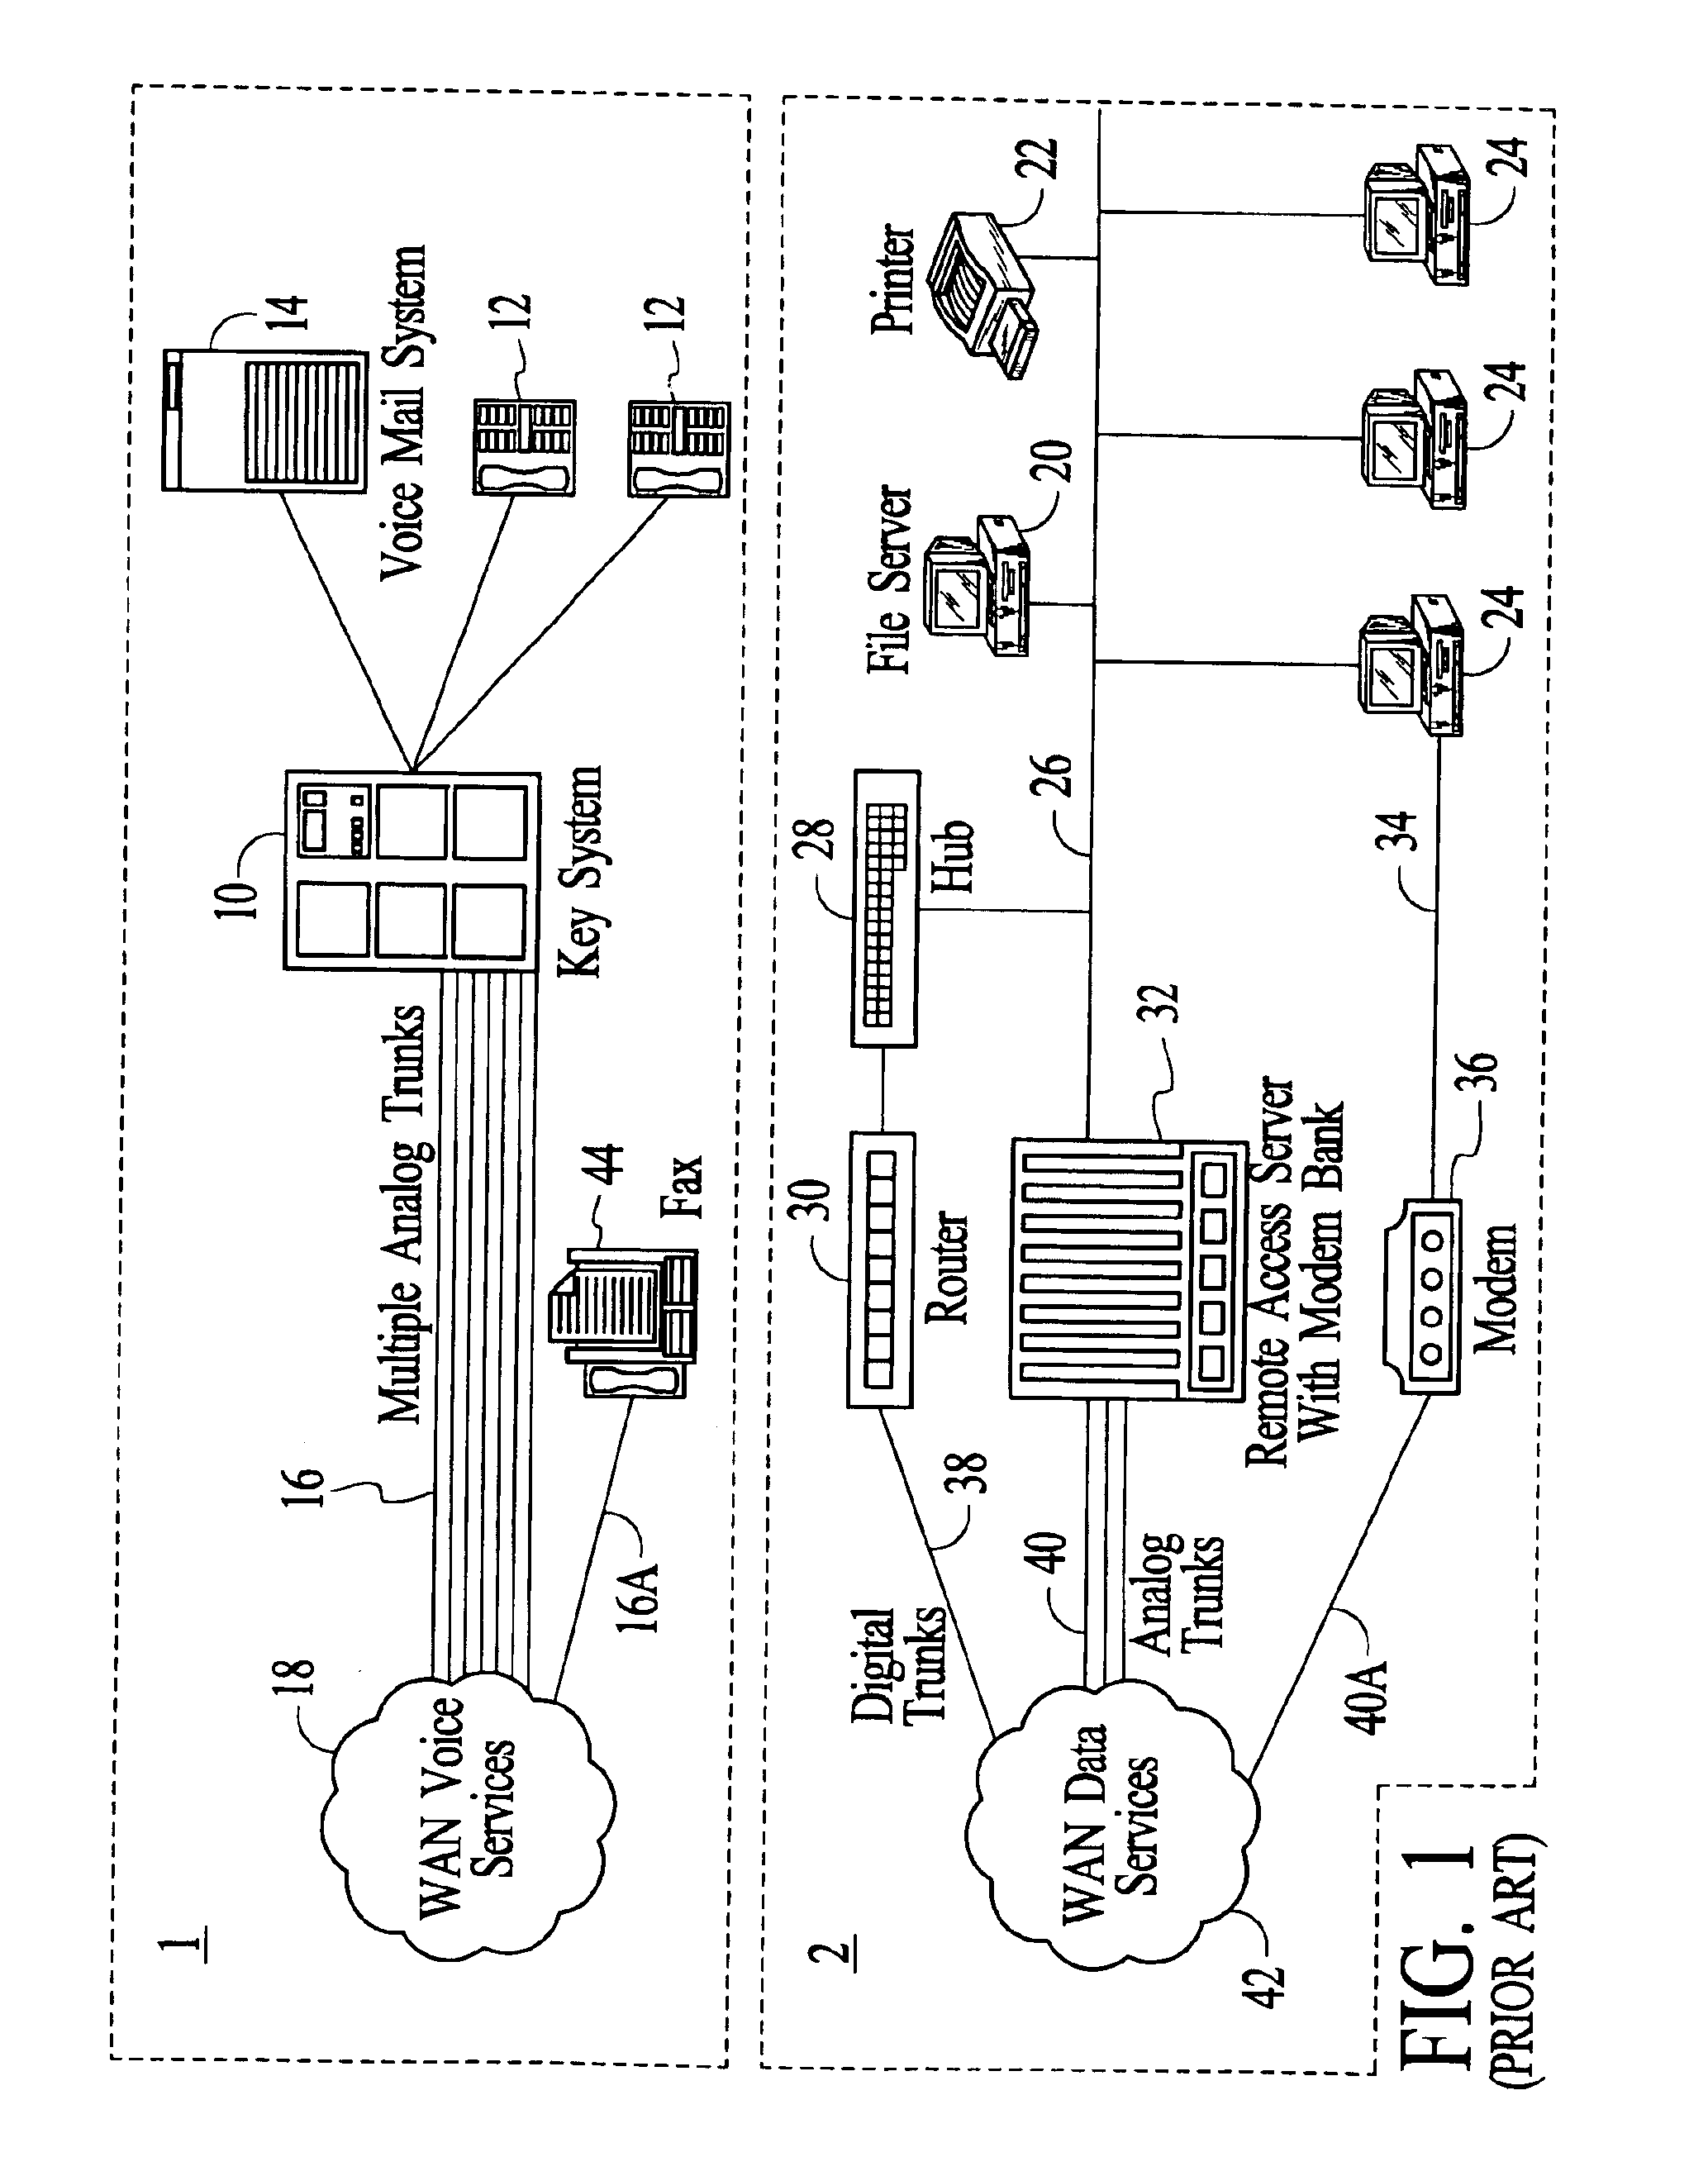 Systems for voice and data communications having TDM and packet buses and telephony station cards including voltage generators